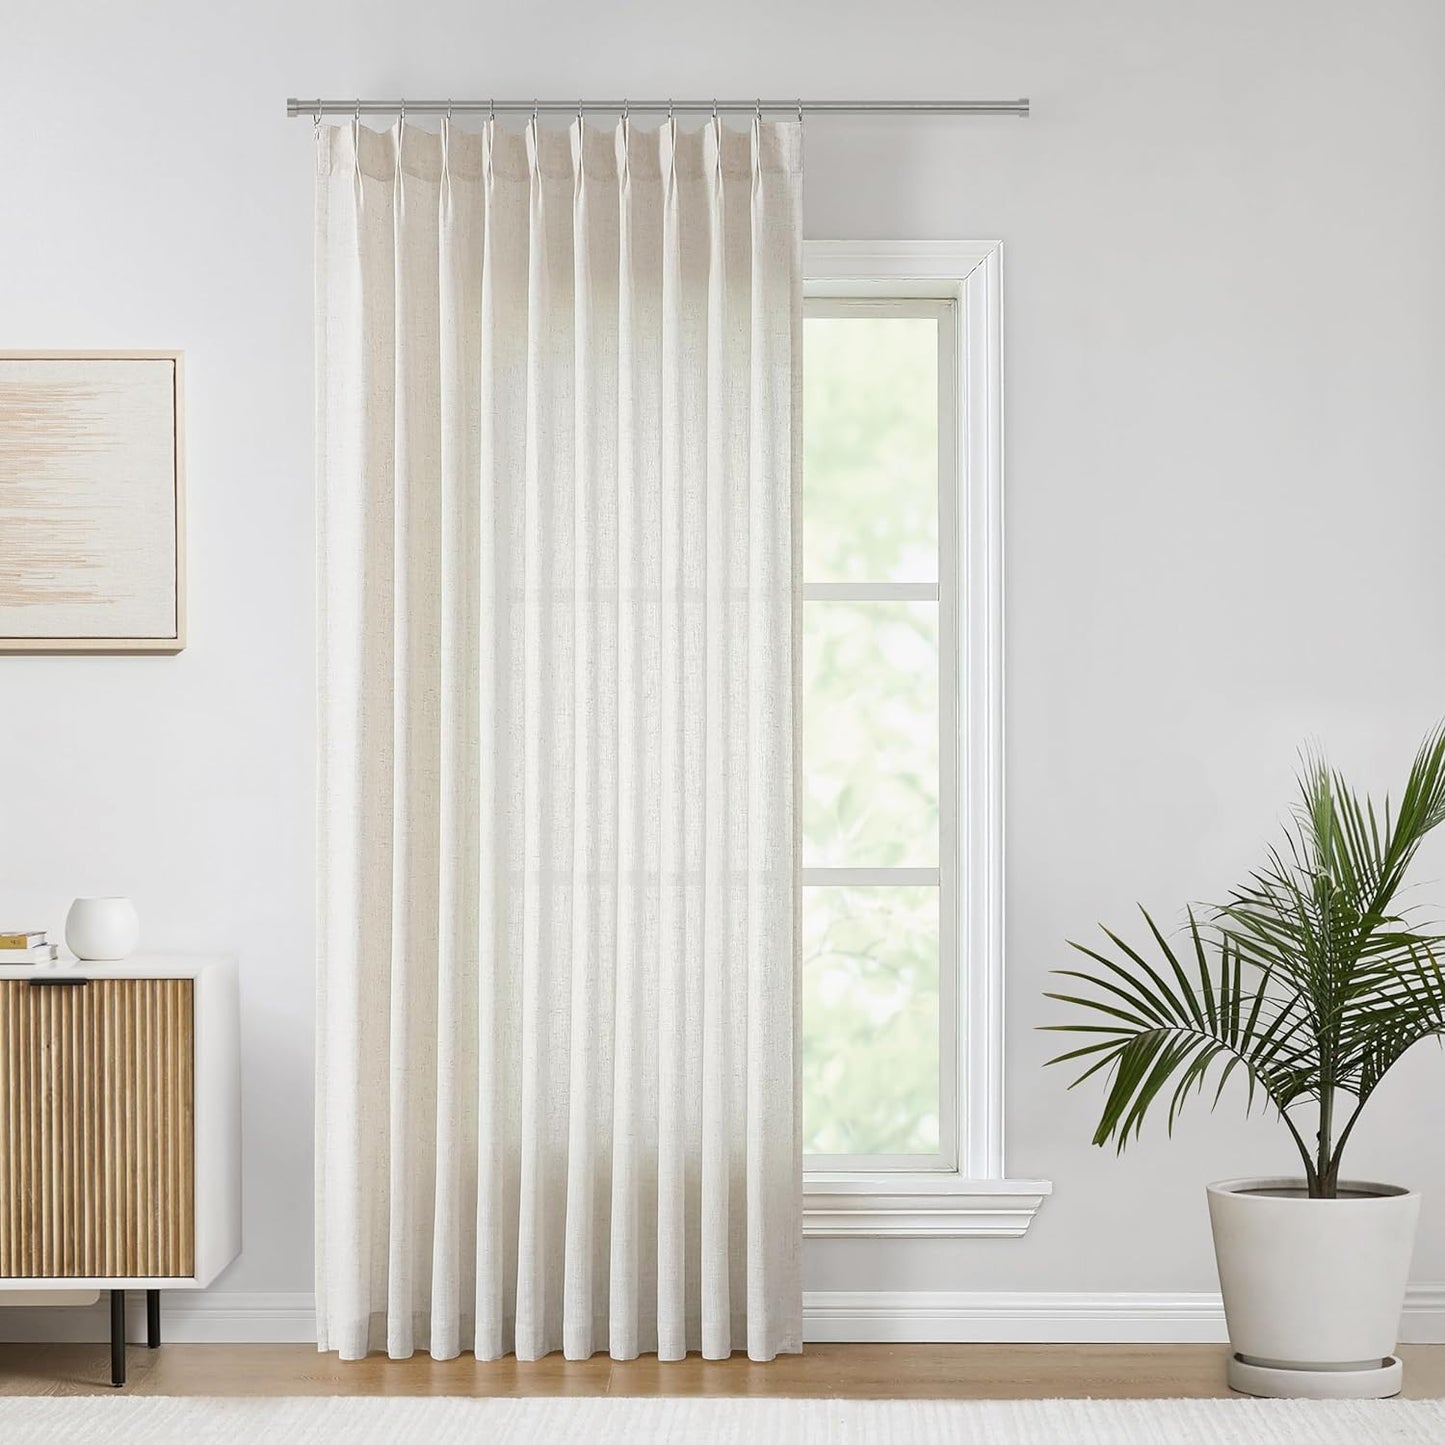 Vision Home Natural Pinch Pleated Semi Sheer Curtains Textured Linen Blended Light Filtering Window Curtains 84 Inch for Living Room Bedroom Pinch Pleat Drapes with Hooks 2 Panels 42" Wx84 L  Vision Home Natural/Pinch 60"X108"X1 